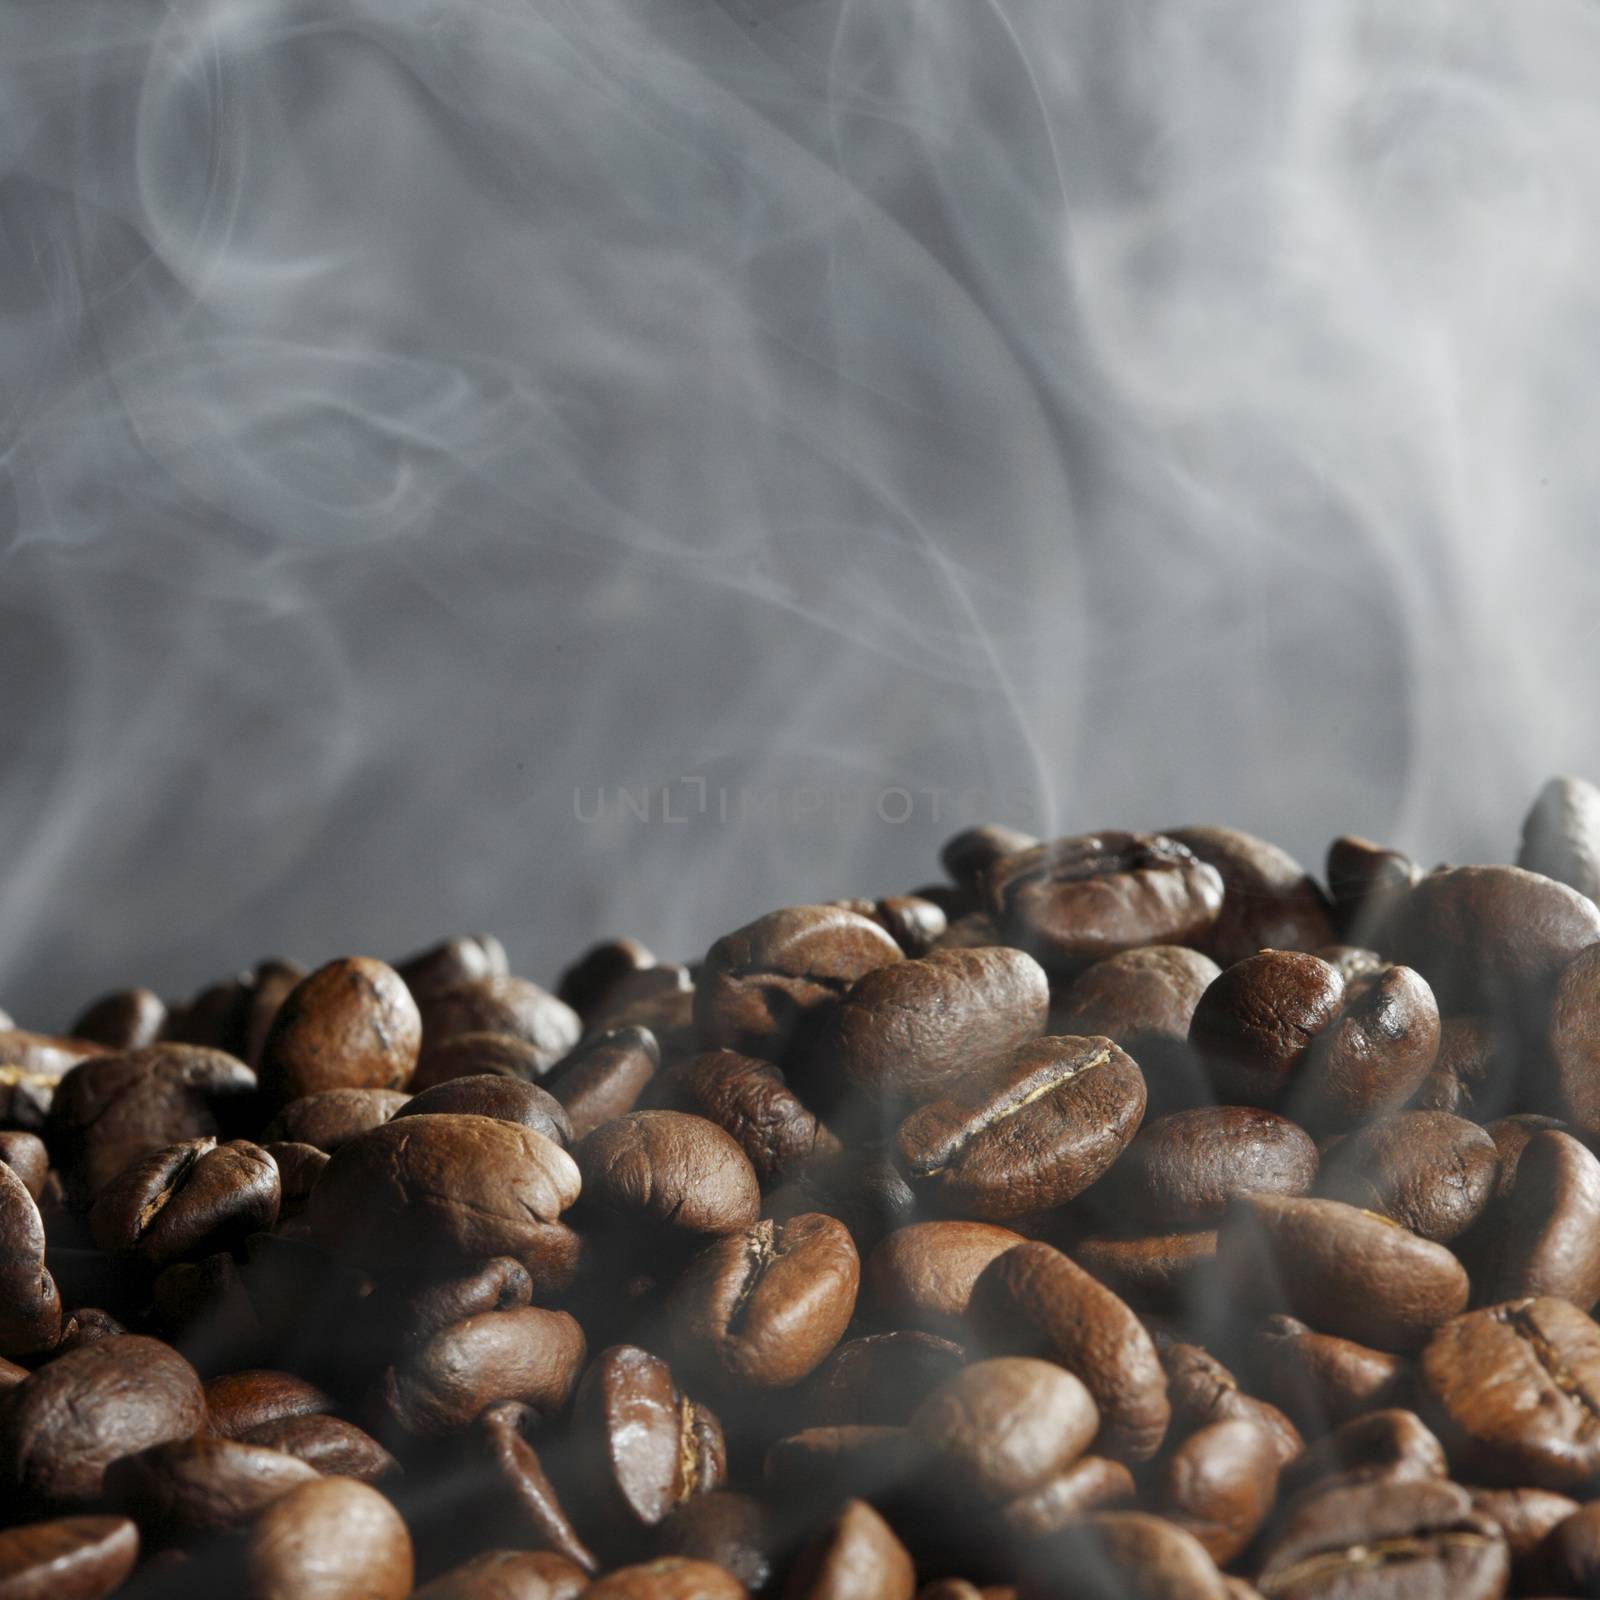 Hot roasted coffee beans and steam on black